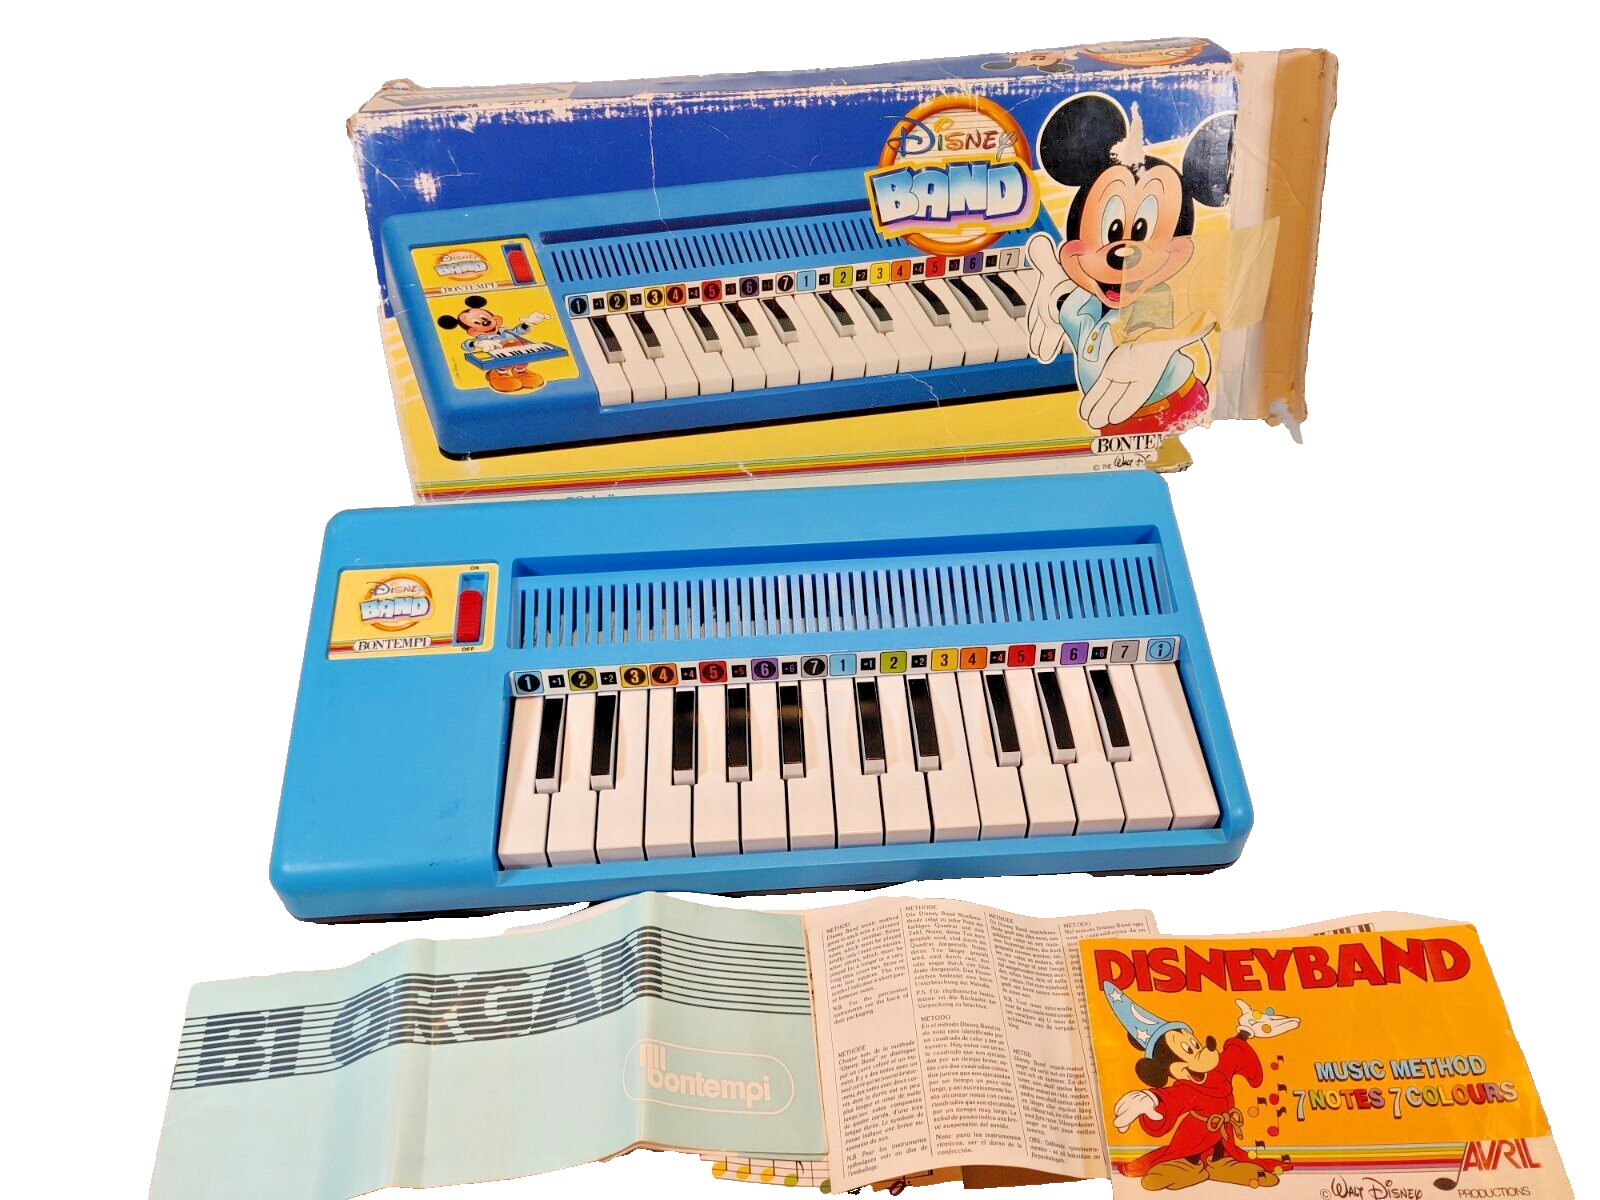 VINTAGE DISNEY BAND MICKEY MOUSE REED ORGAN 7 NOTE BONTEMPI MADE IN ITALY 80s - £31.91 GBP